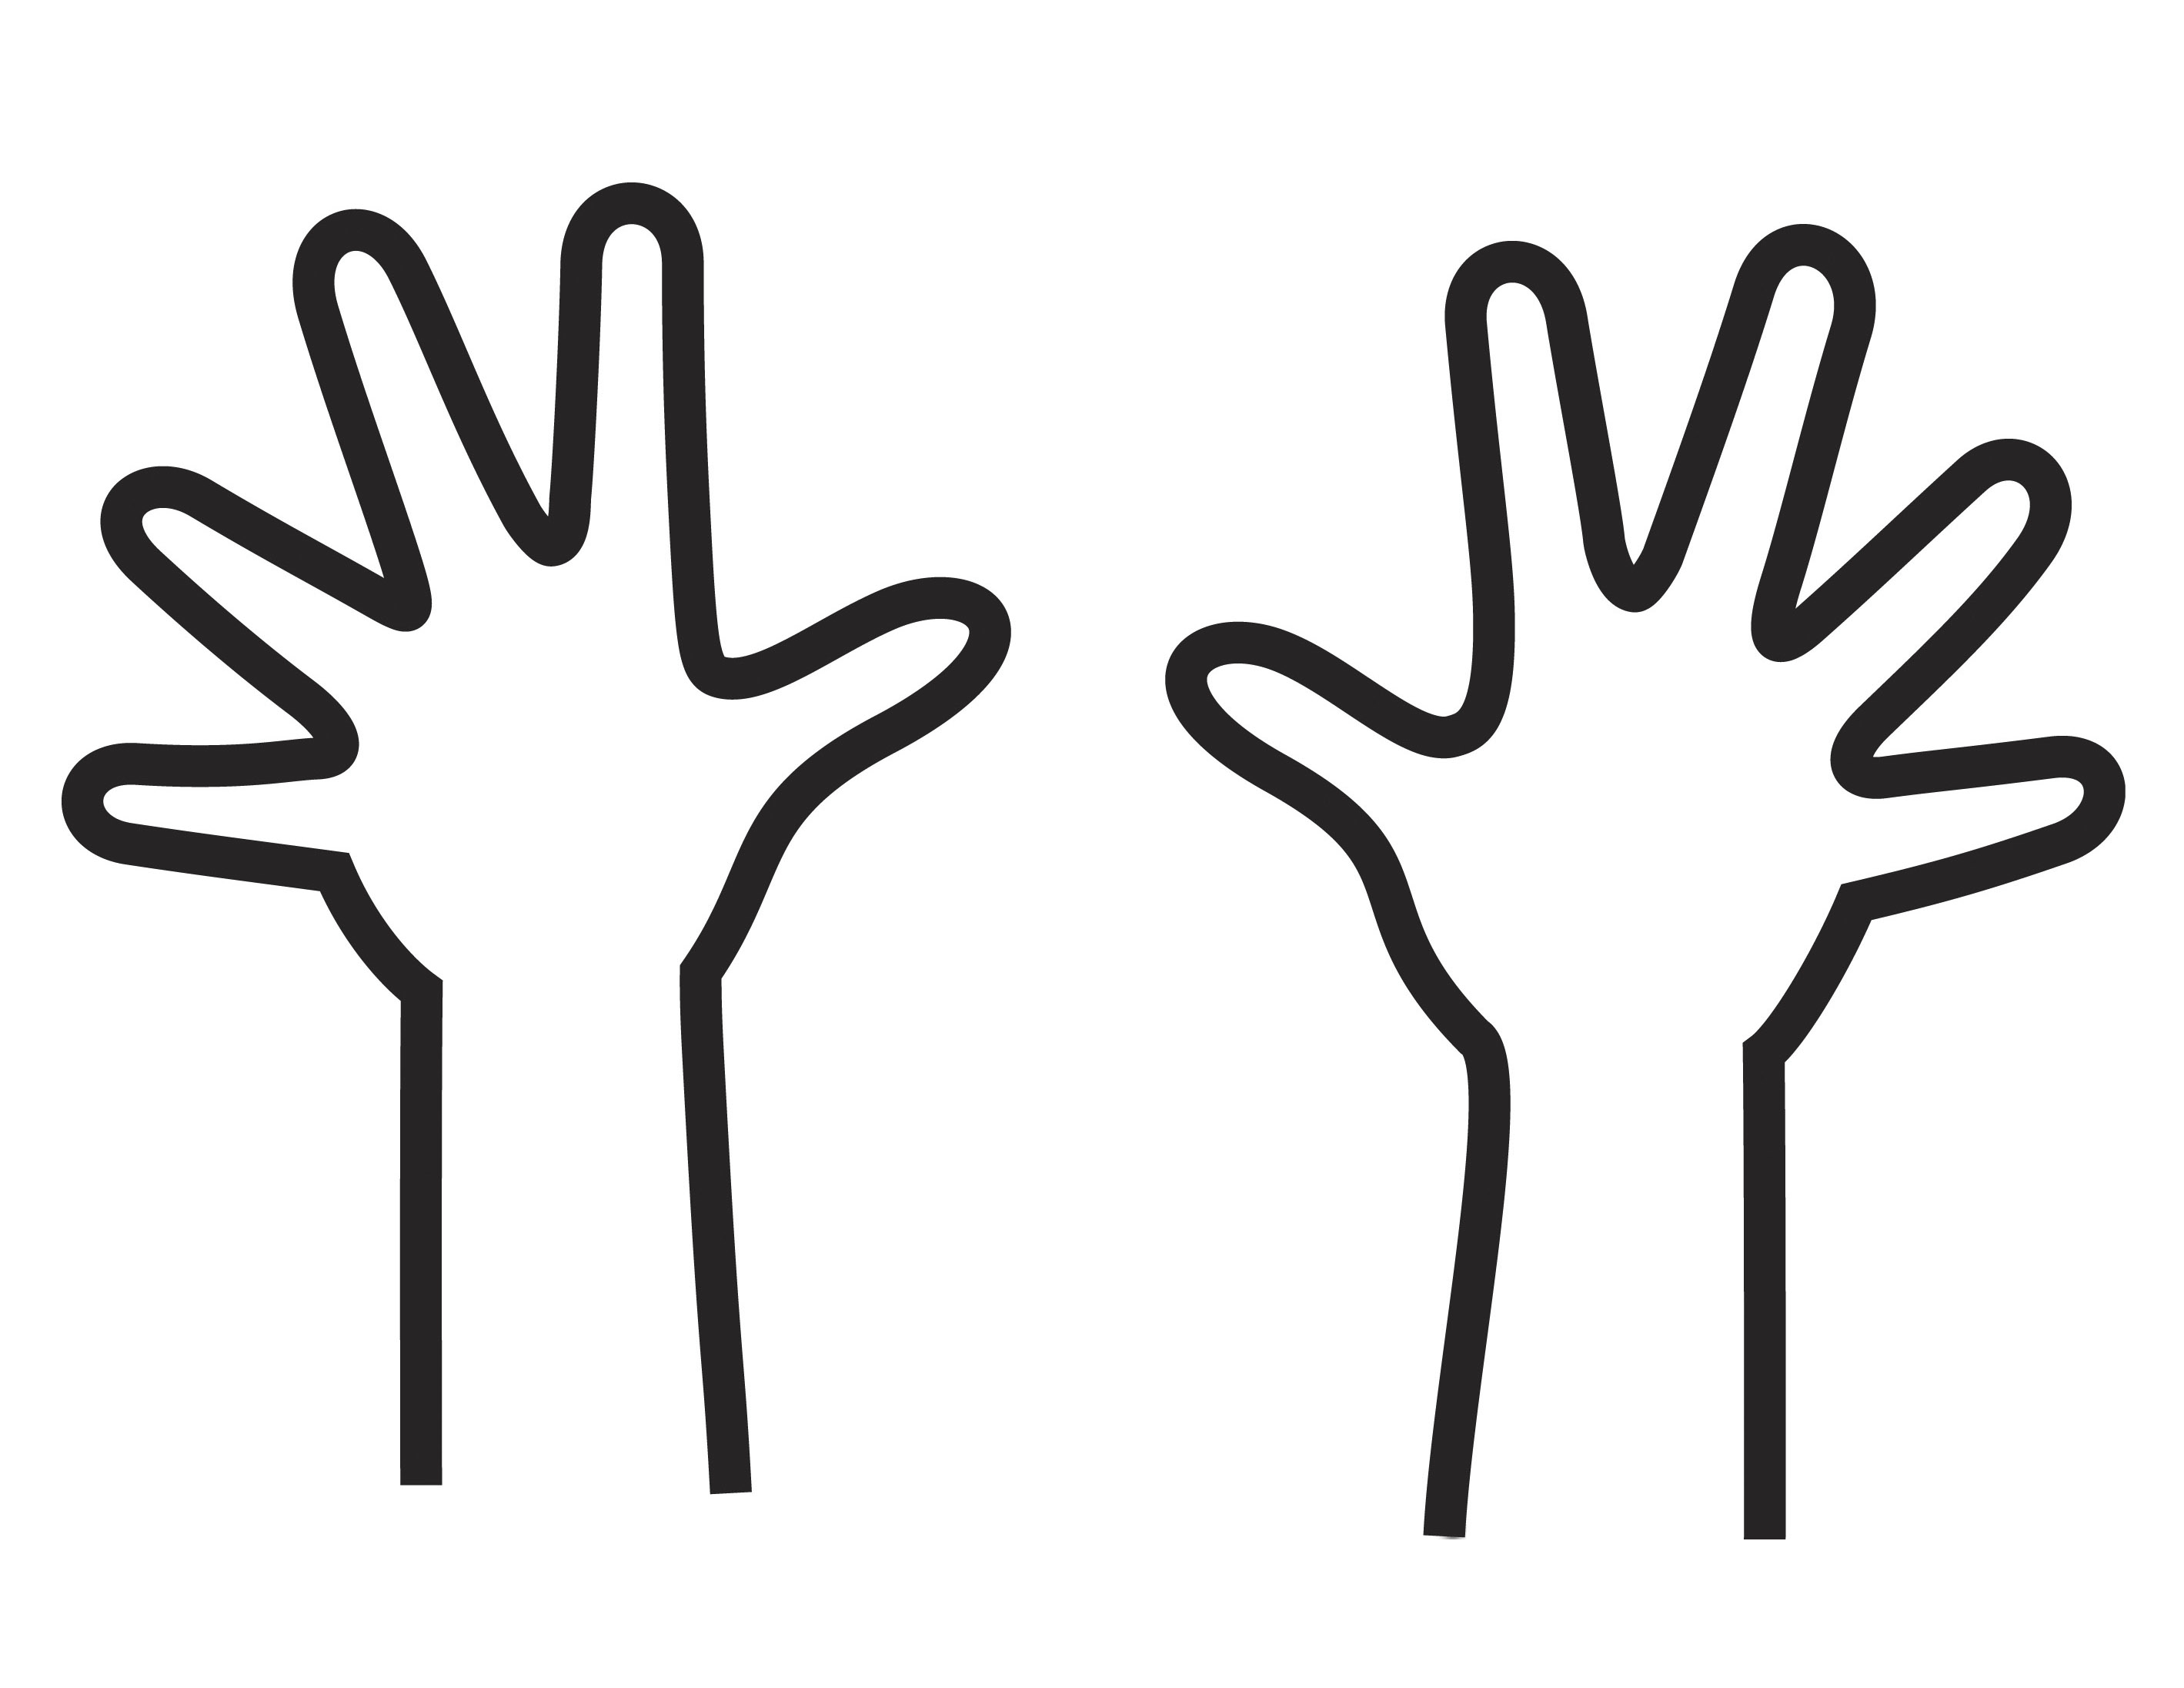 An illustration of two hands.